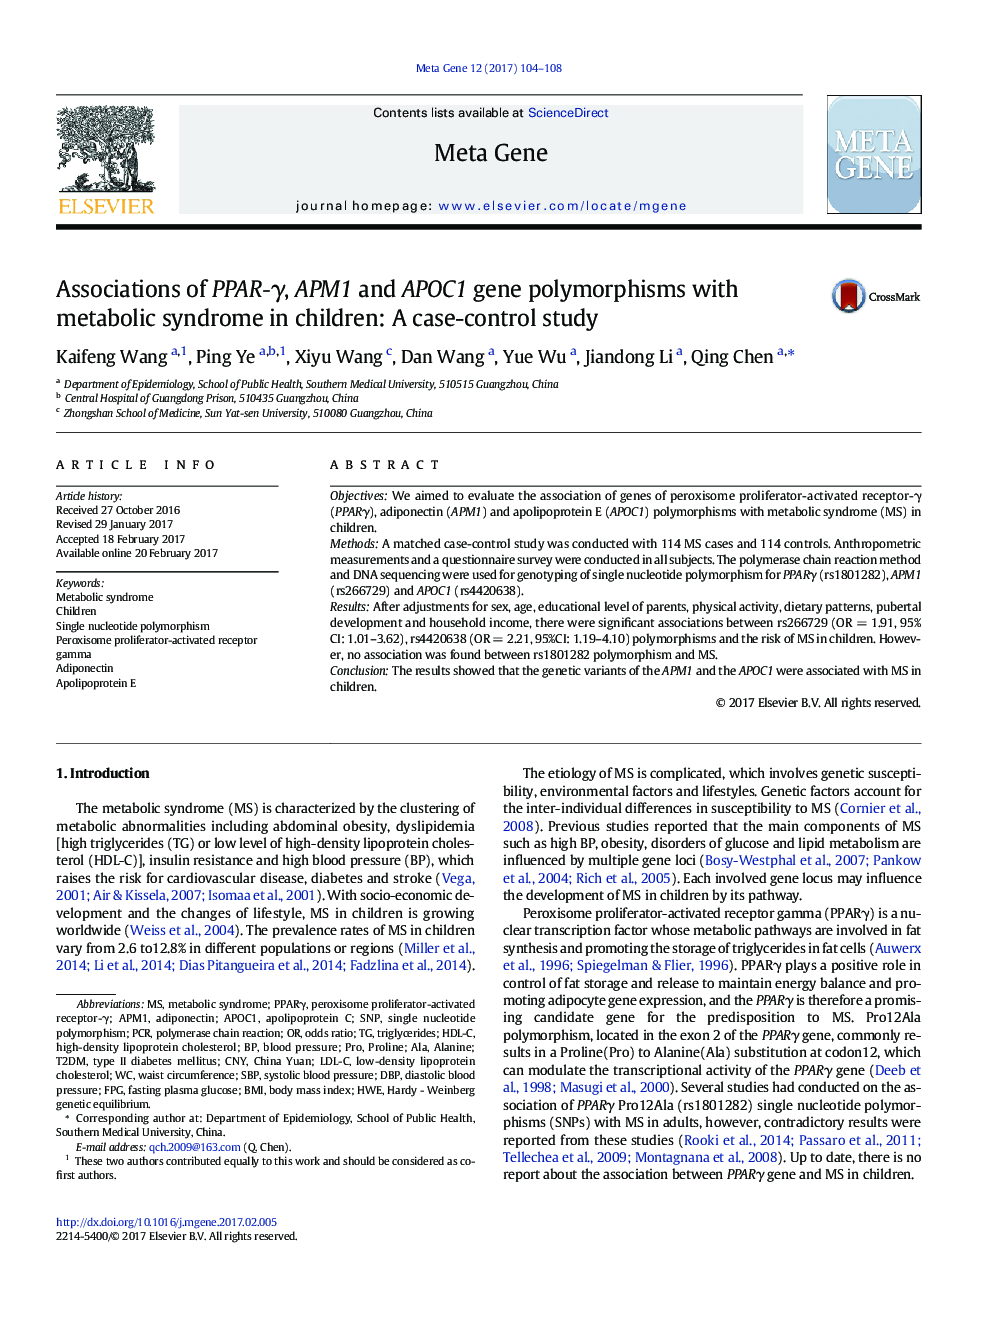 Associations of PPAR-Î³, APM1 and APOC1 gene polymorphisms with metabolic syndrome in children: A case-control study